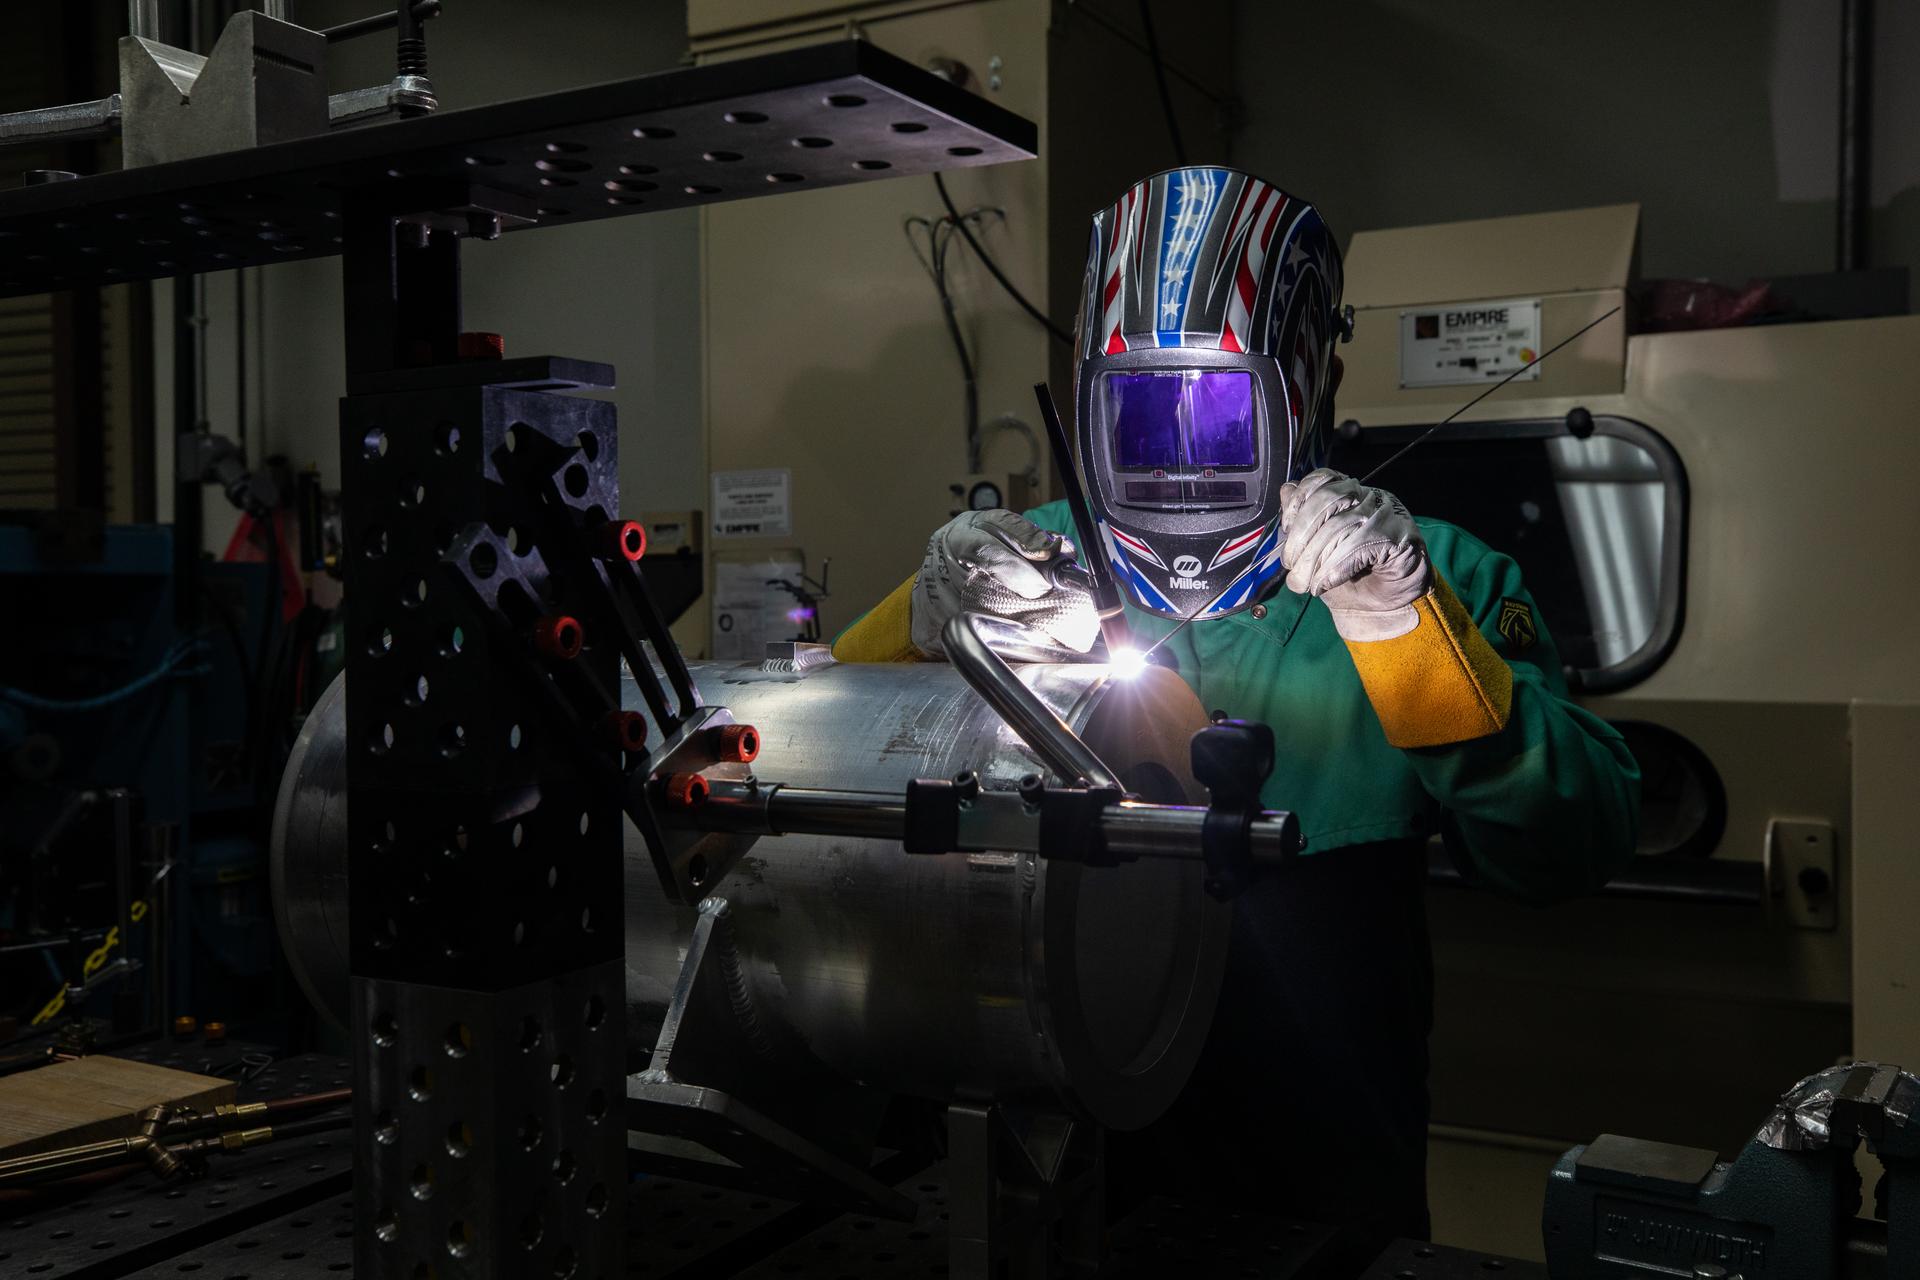 A mechanical engineering technician welds a part of a camera enclosure which will be used at Launch Complex 39B inside the Prototype Development Laboratory